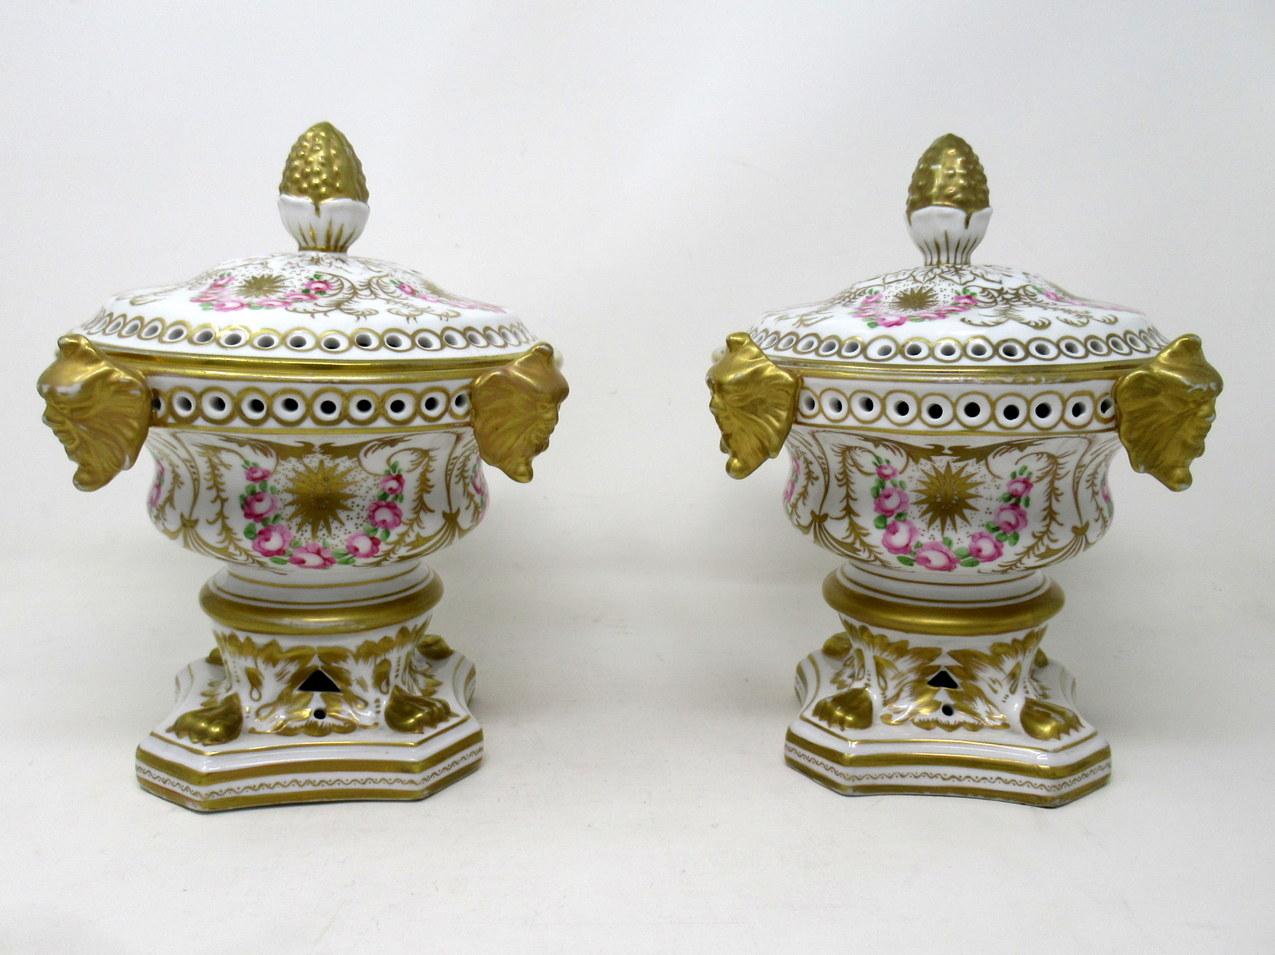 Wonderful identical pair of early English hand painted royal crown derby style lidded urns of generous proportions, possibly used for purpose as Pot Pourri or Pastile Burners of traditional form. Mid Twentieth Century, probably made in Staffordshire